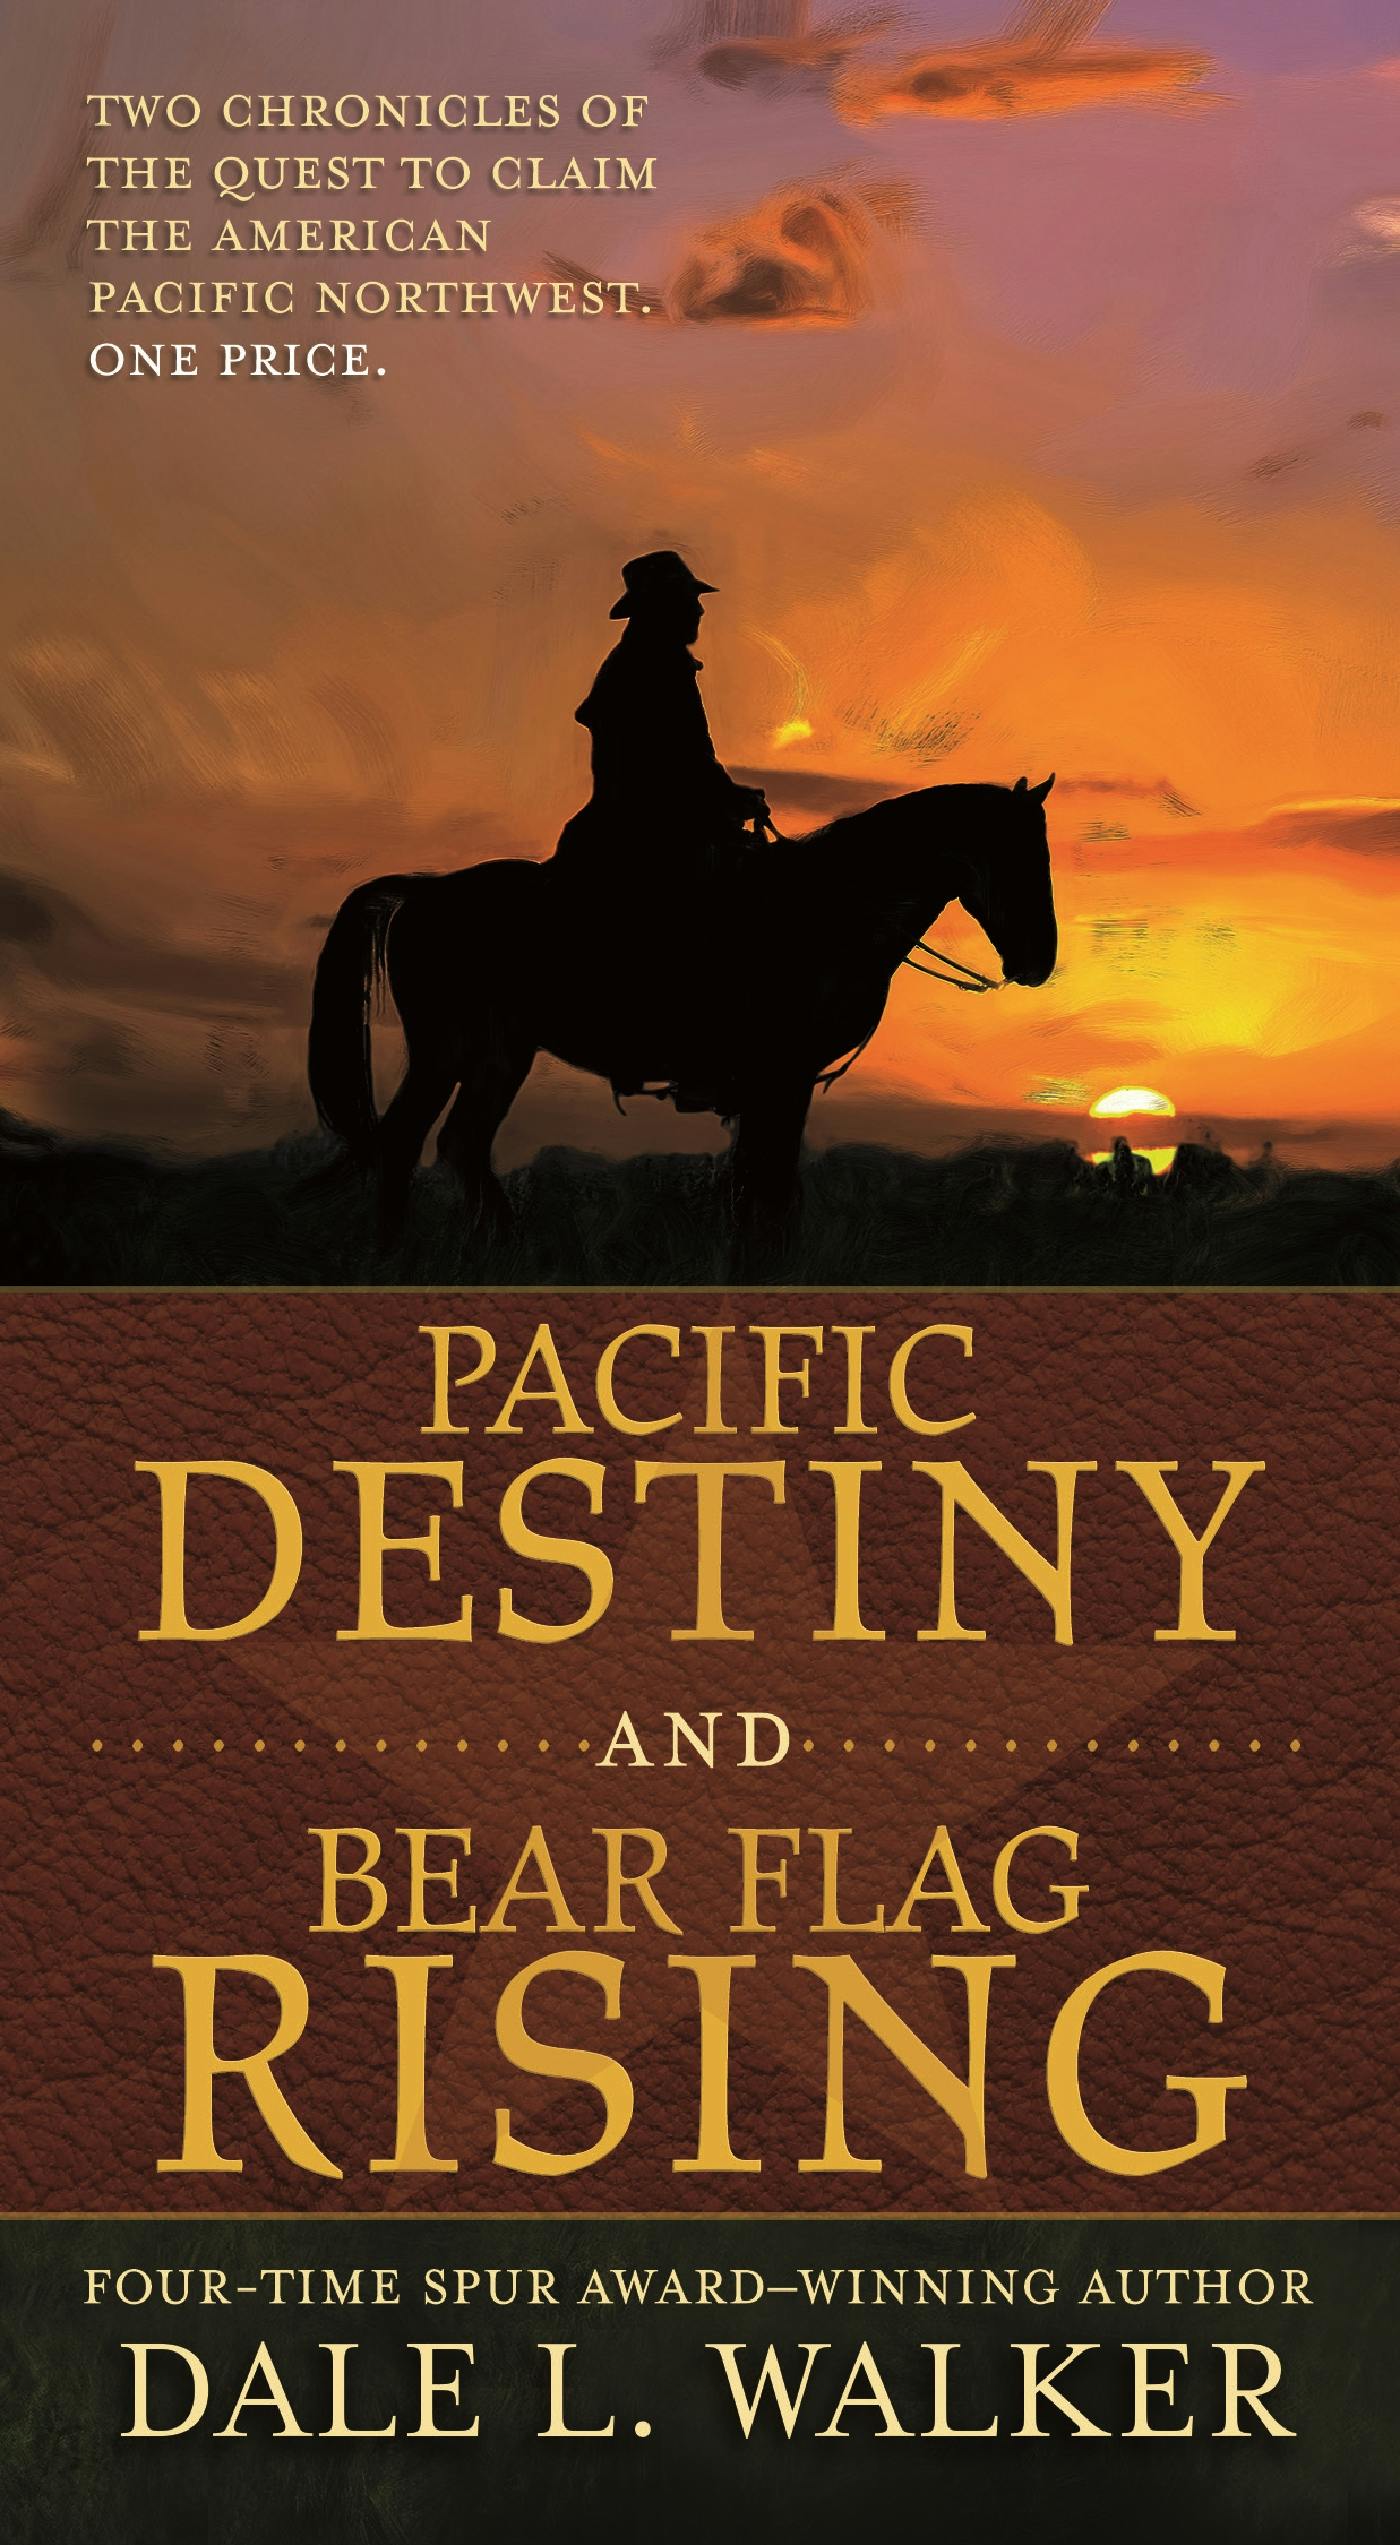 Cover for the book titled as: Pacific Destiny and Bear Flag Rising